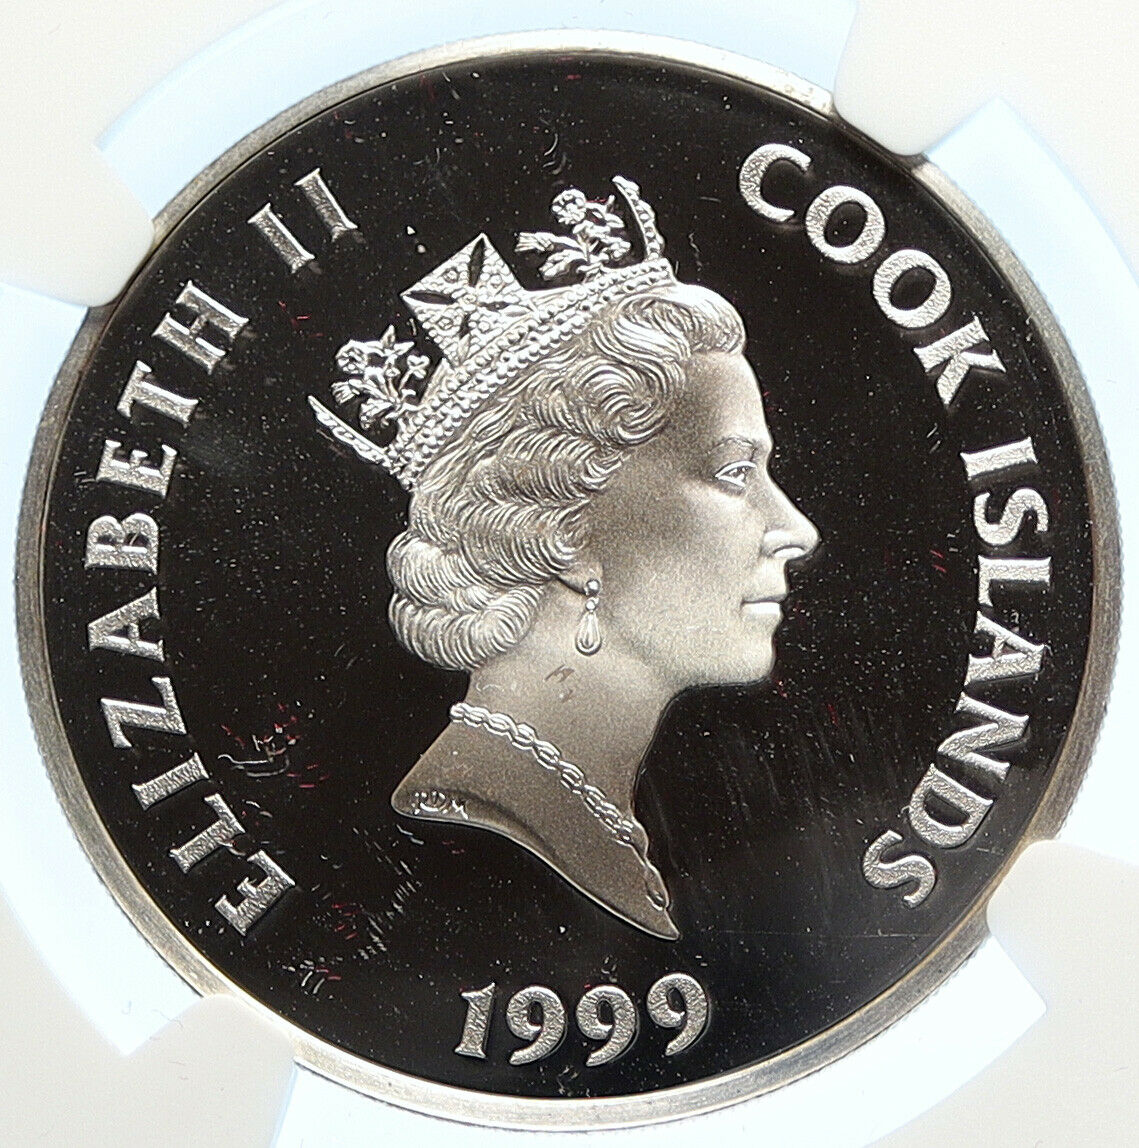 1999 COOK ISLANDS Elizabeth II MAN ON THE MOON Proof Silver $5 Coin NGC i106799